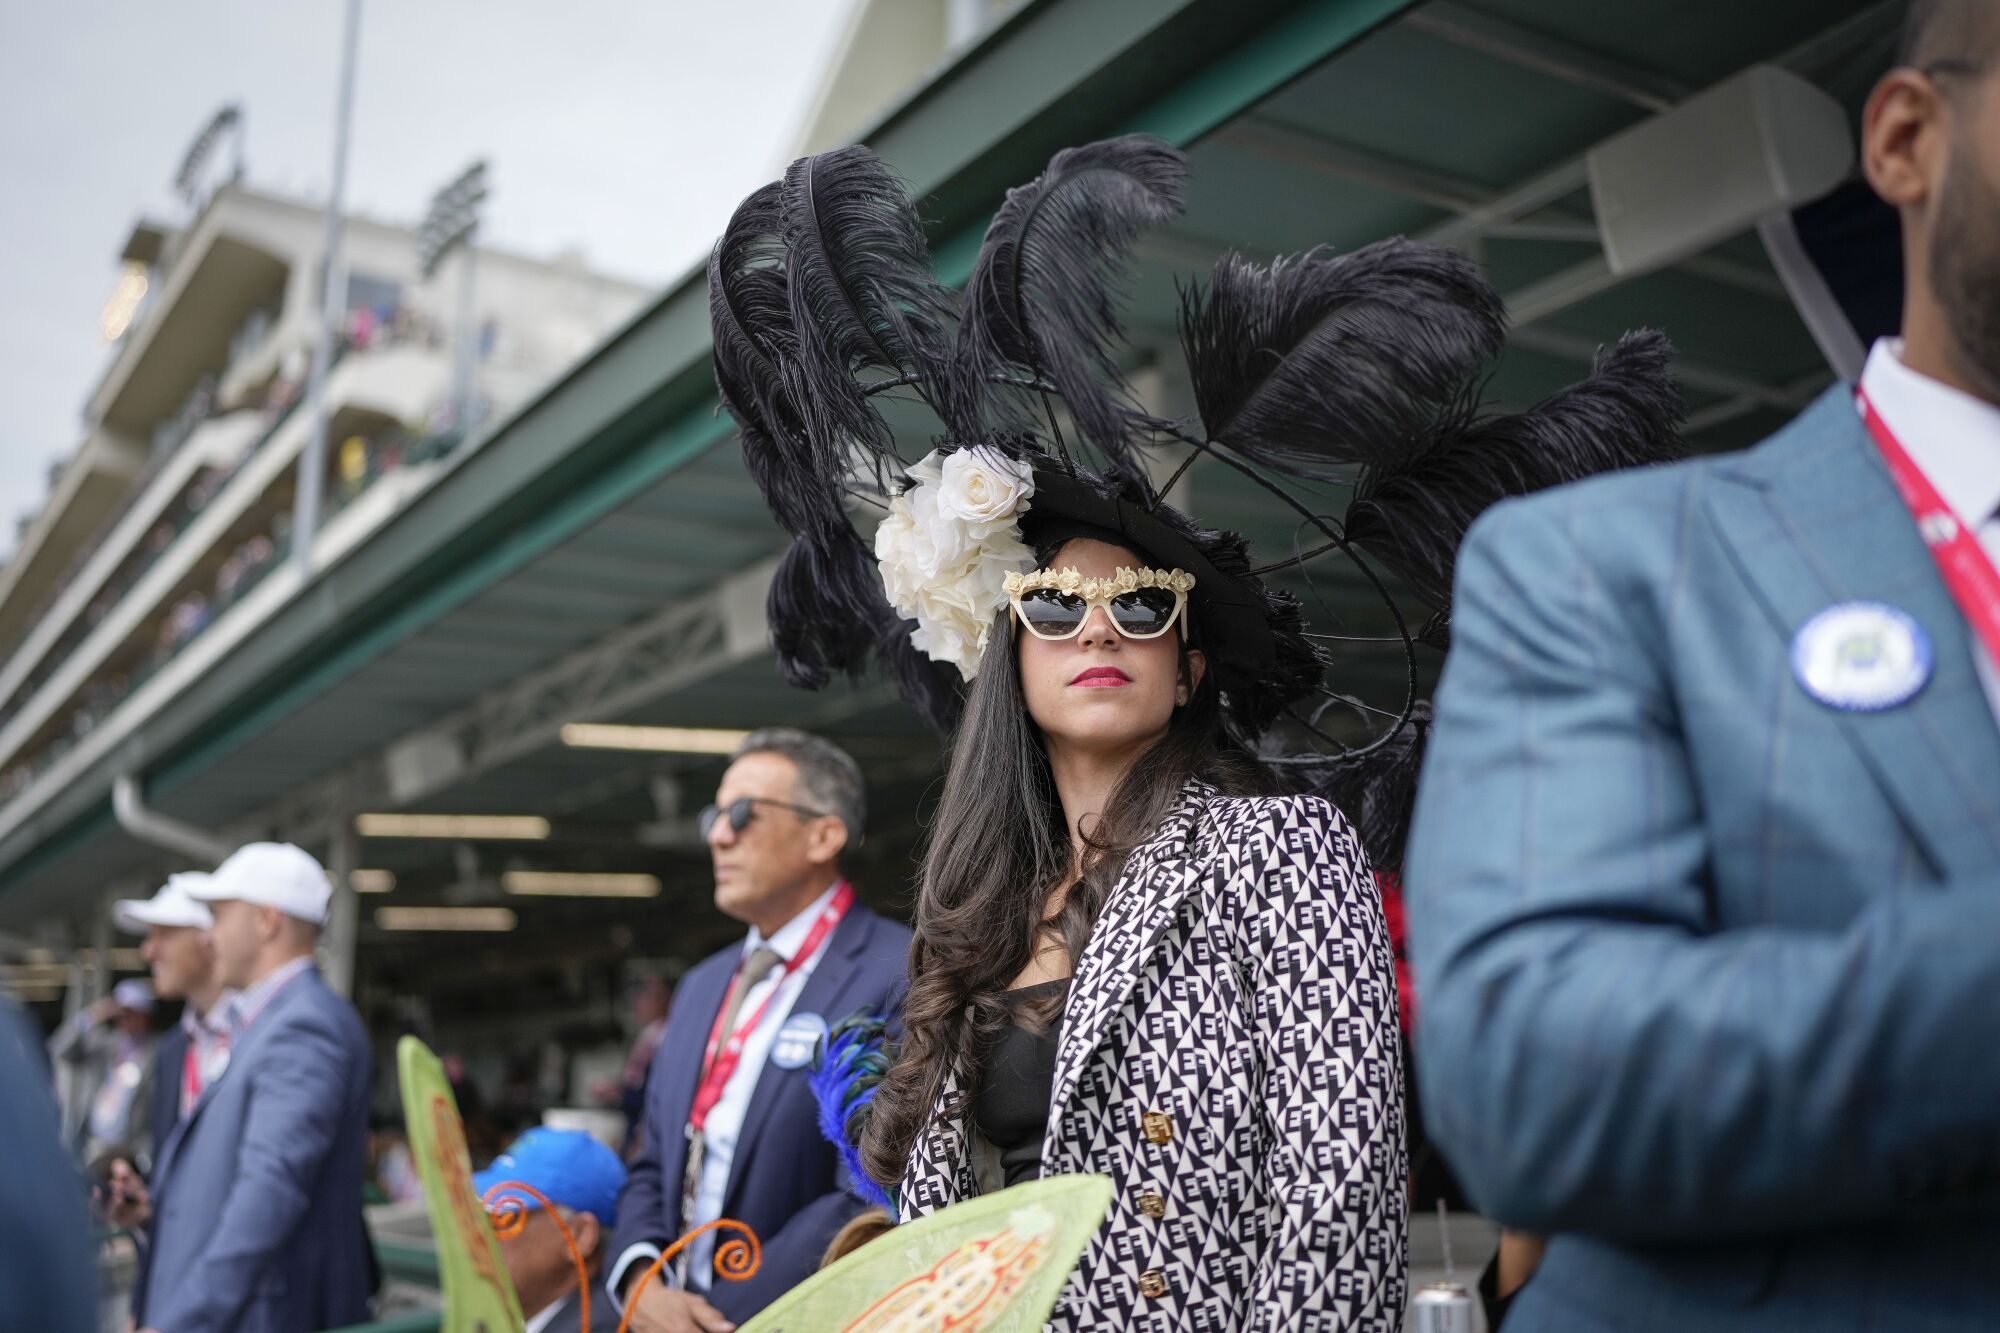 A woman with an elaborate wide-brimmed hat featuring tall black feathers watches a race at Churchill Downs.